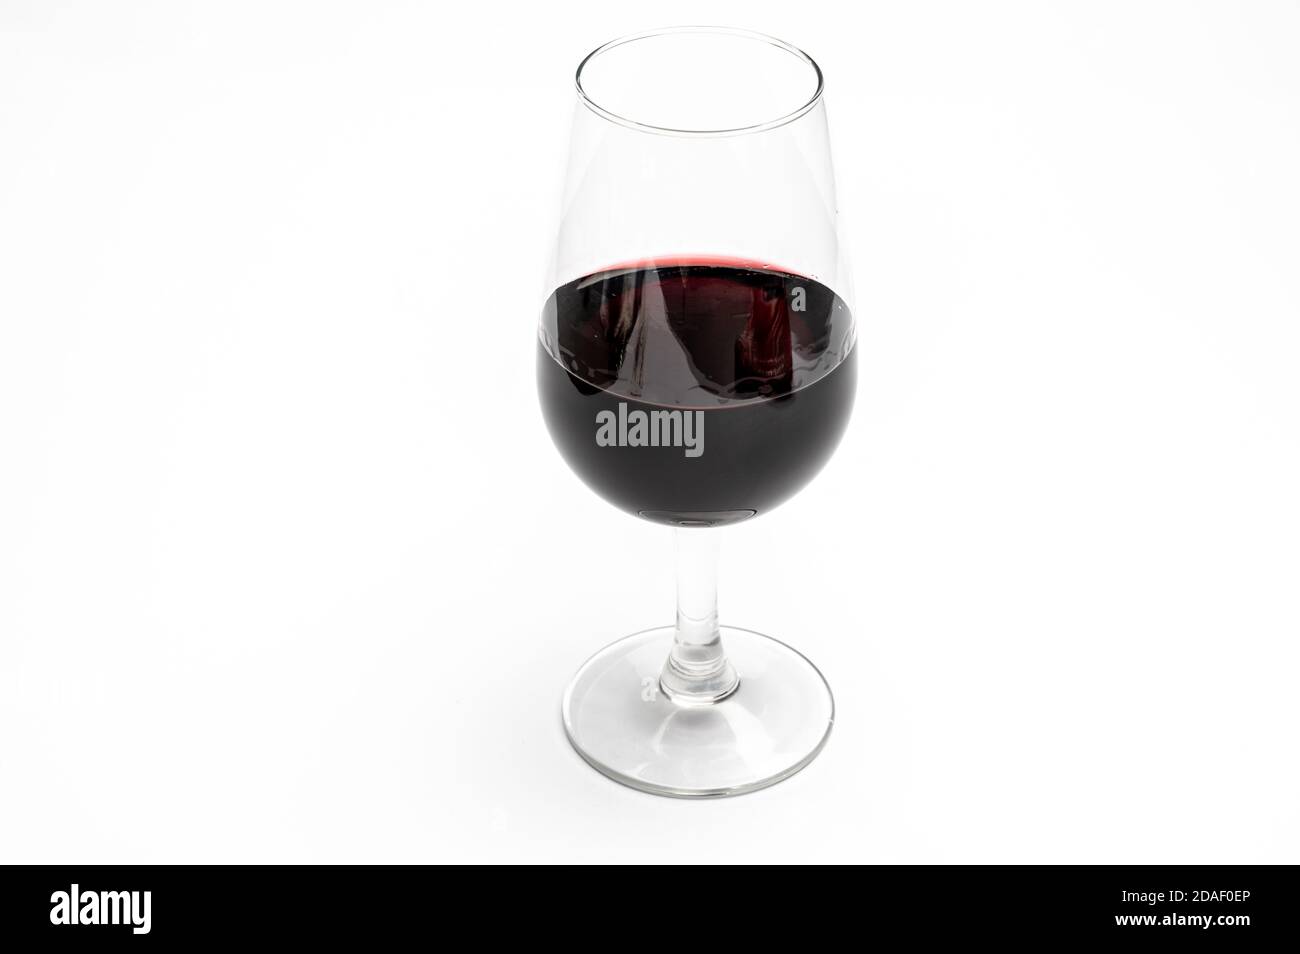 Glass of vintage ruby port wine isolated on white background close up Stock Photo